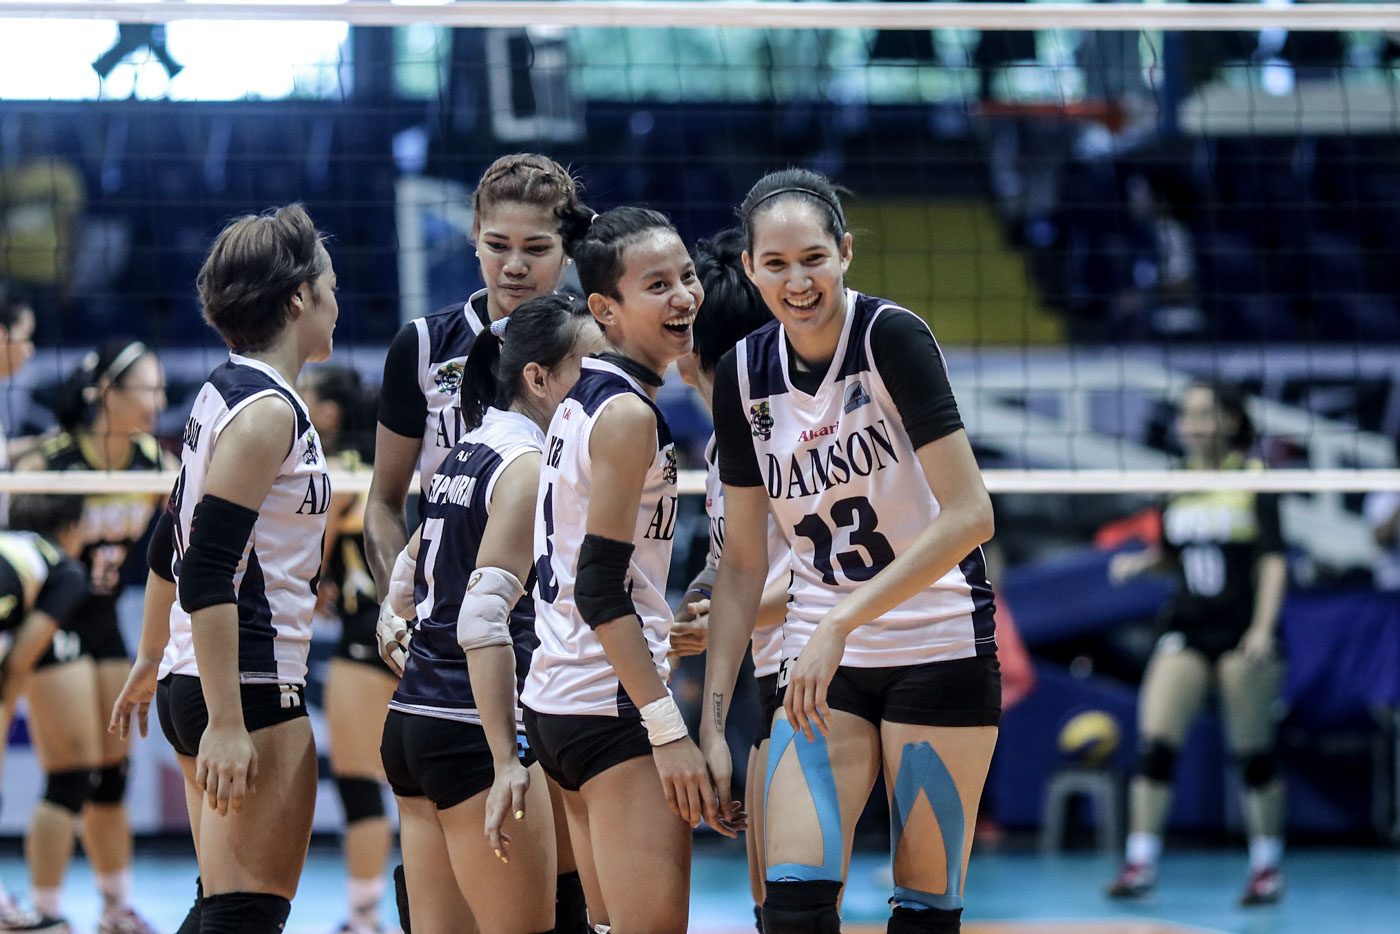 WATCH: Adamson Lady Falcons put themselves to the test